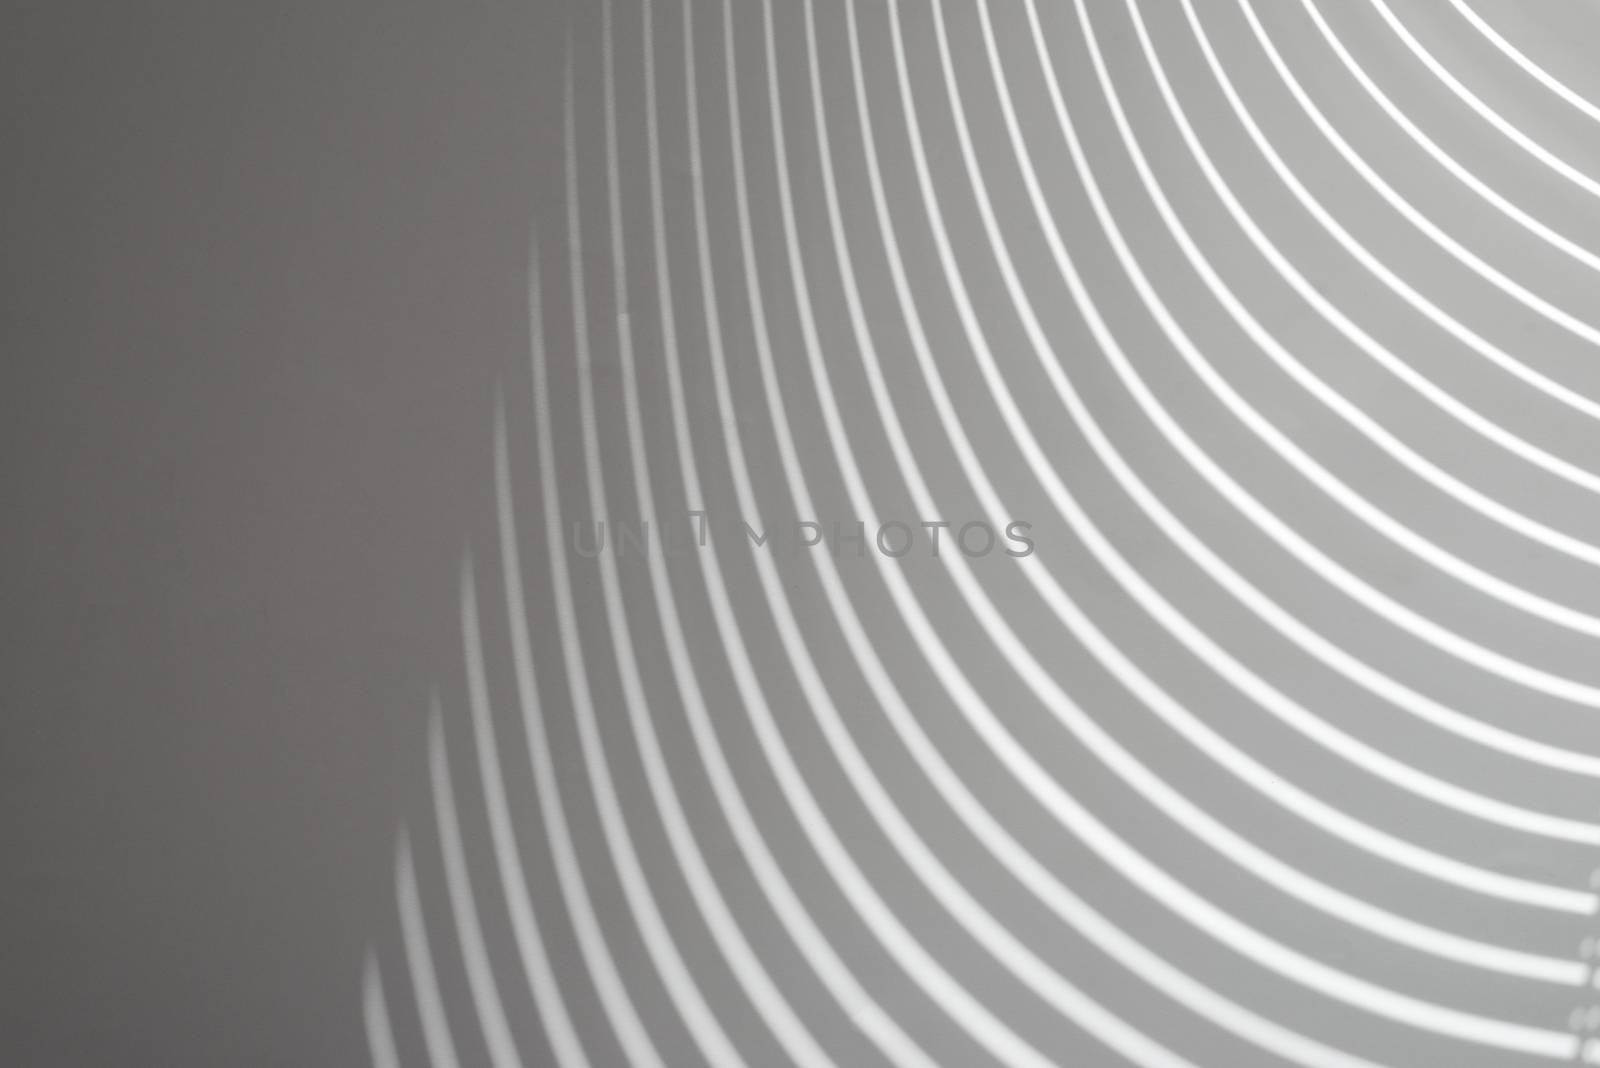 Blind shadow on white background